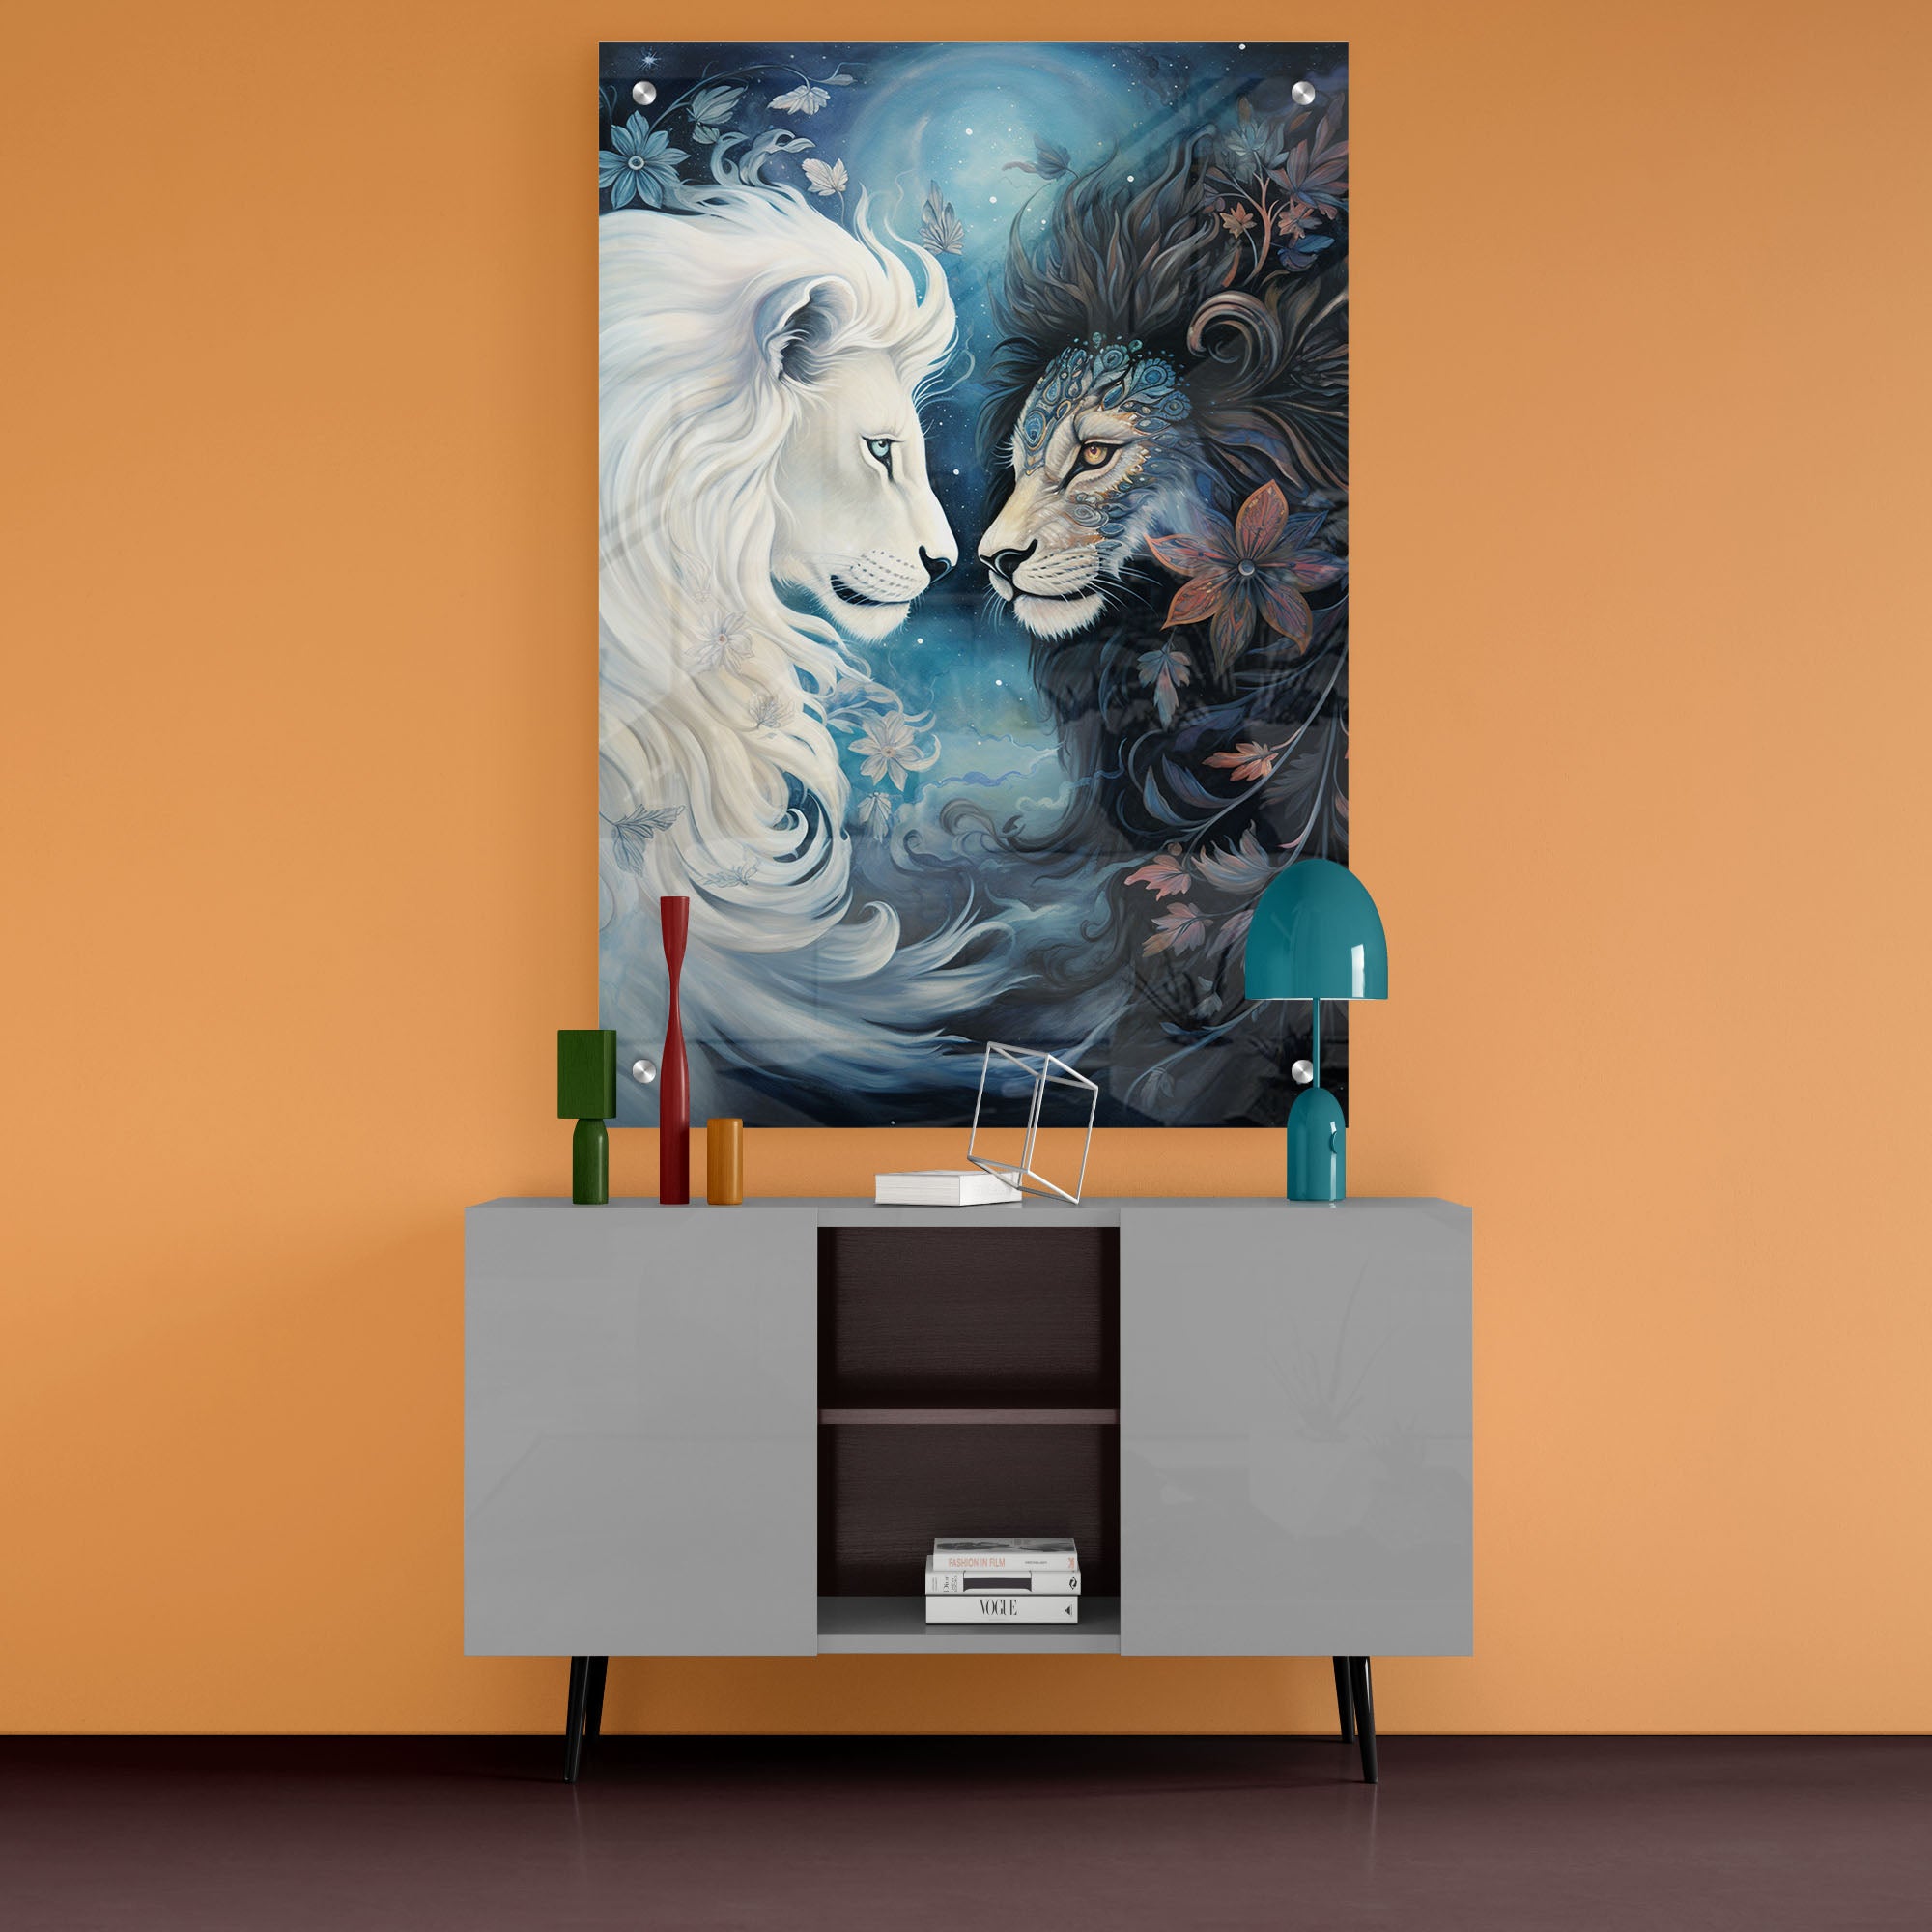 Black And White Yin Yang Love Lion Acrylic Wall Painting